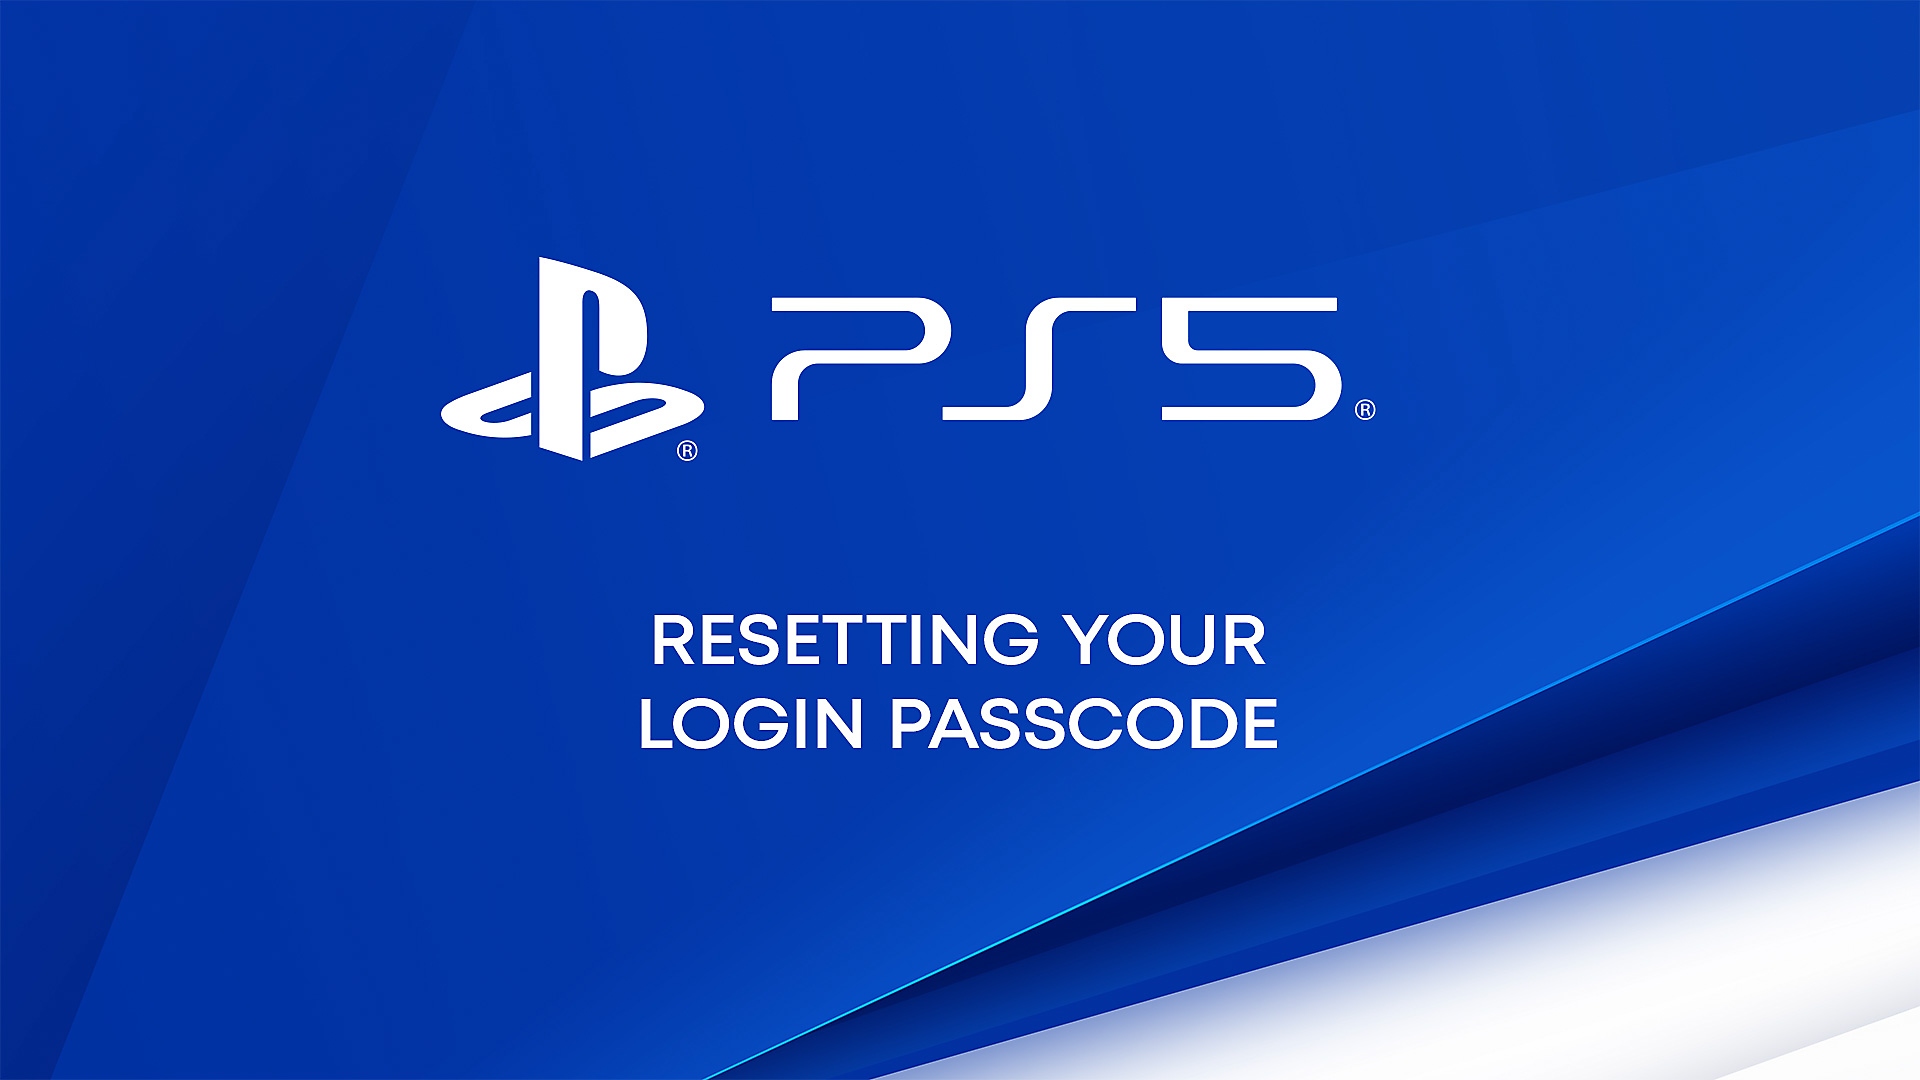 Video showing how to reset a login passcode on PS5